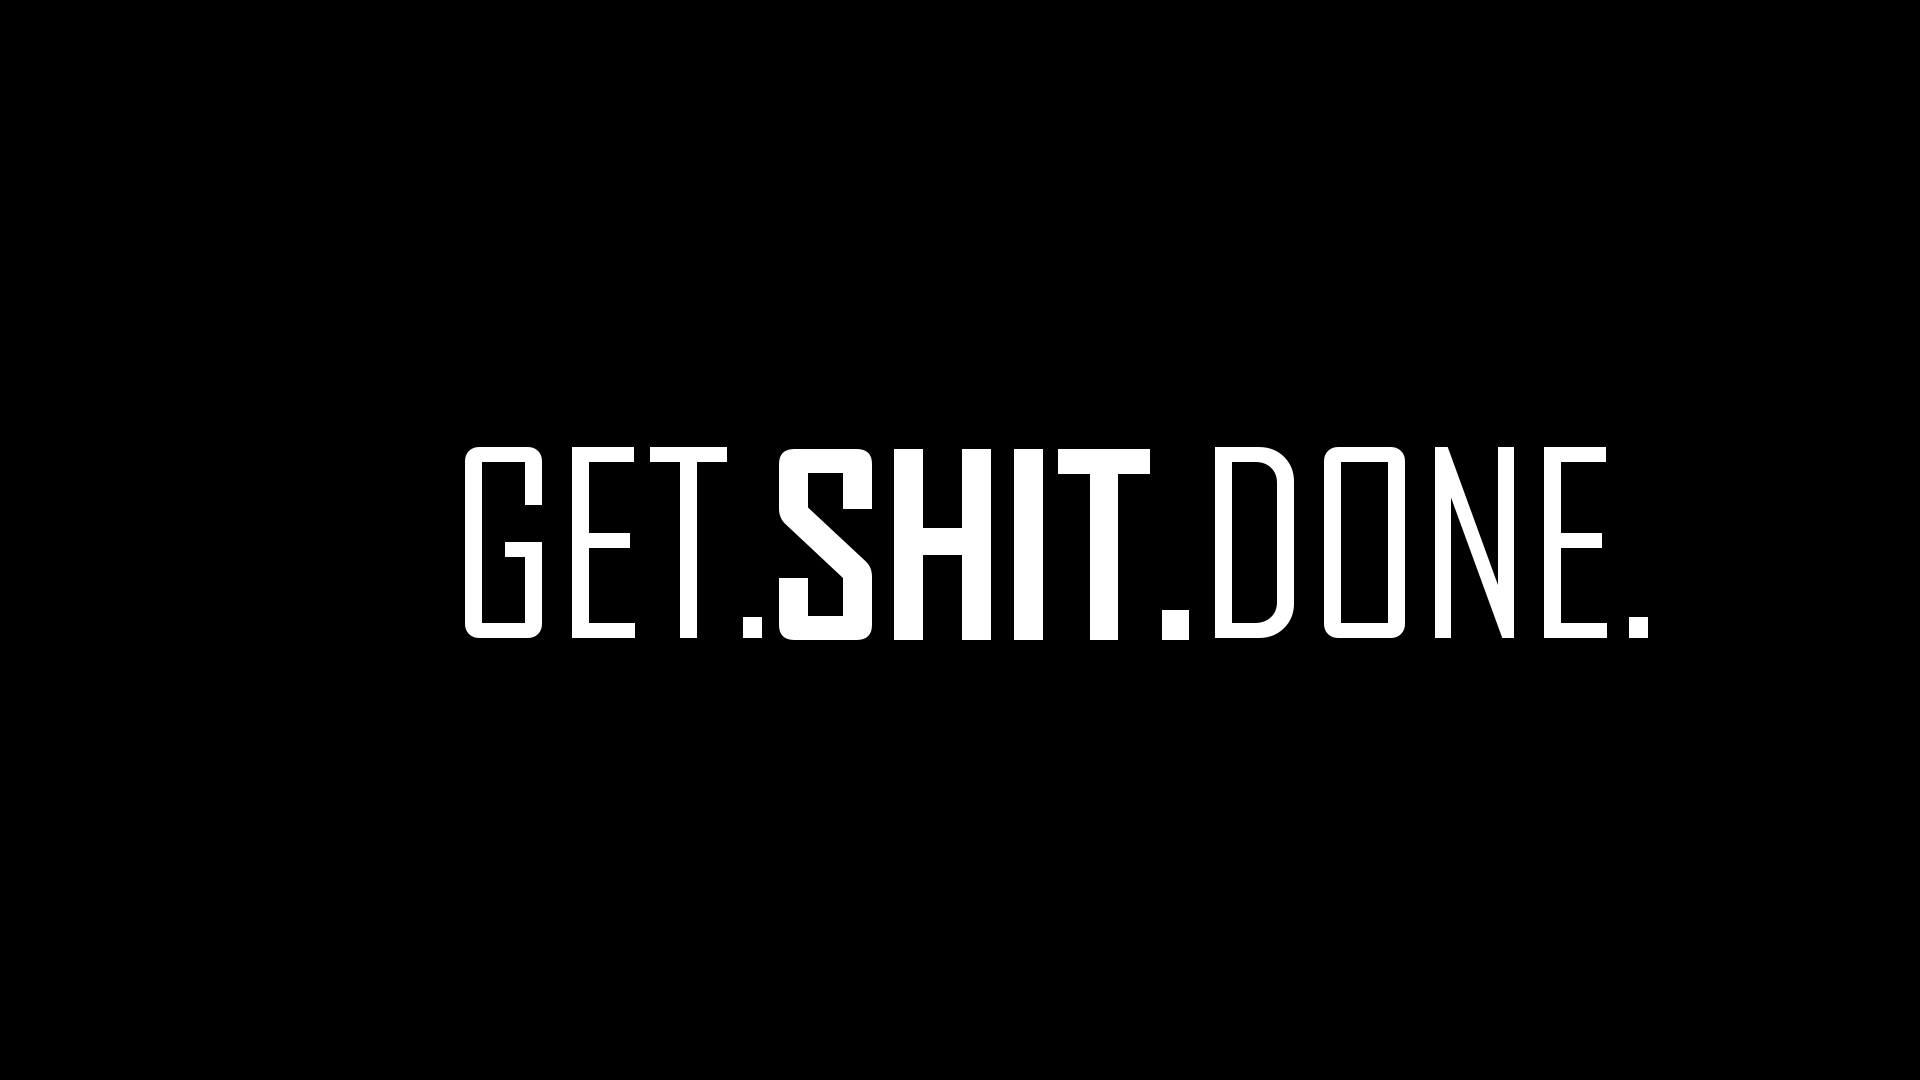 Get Shit Done Wallpaper Free Get Shit Done Background